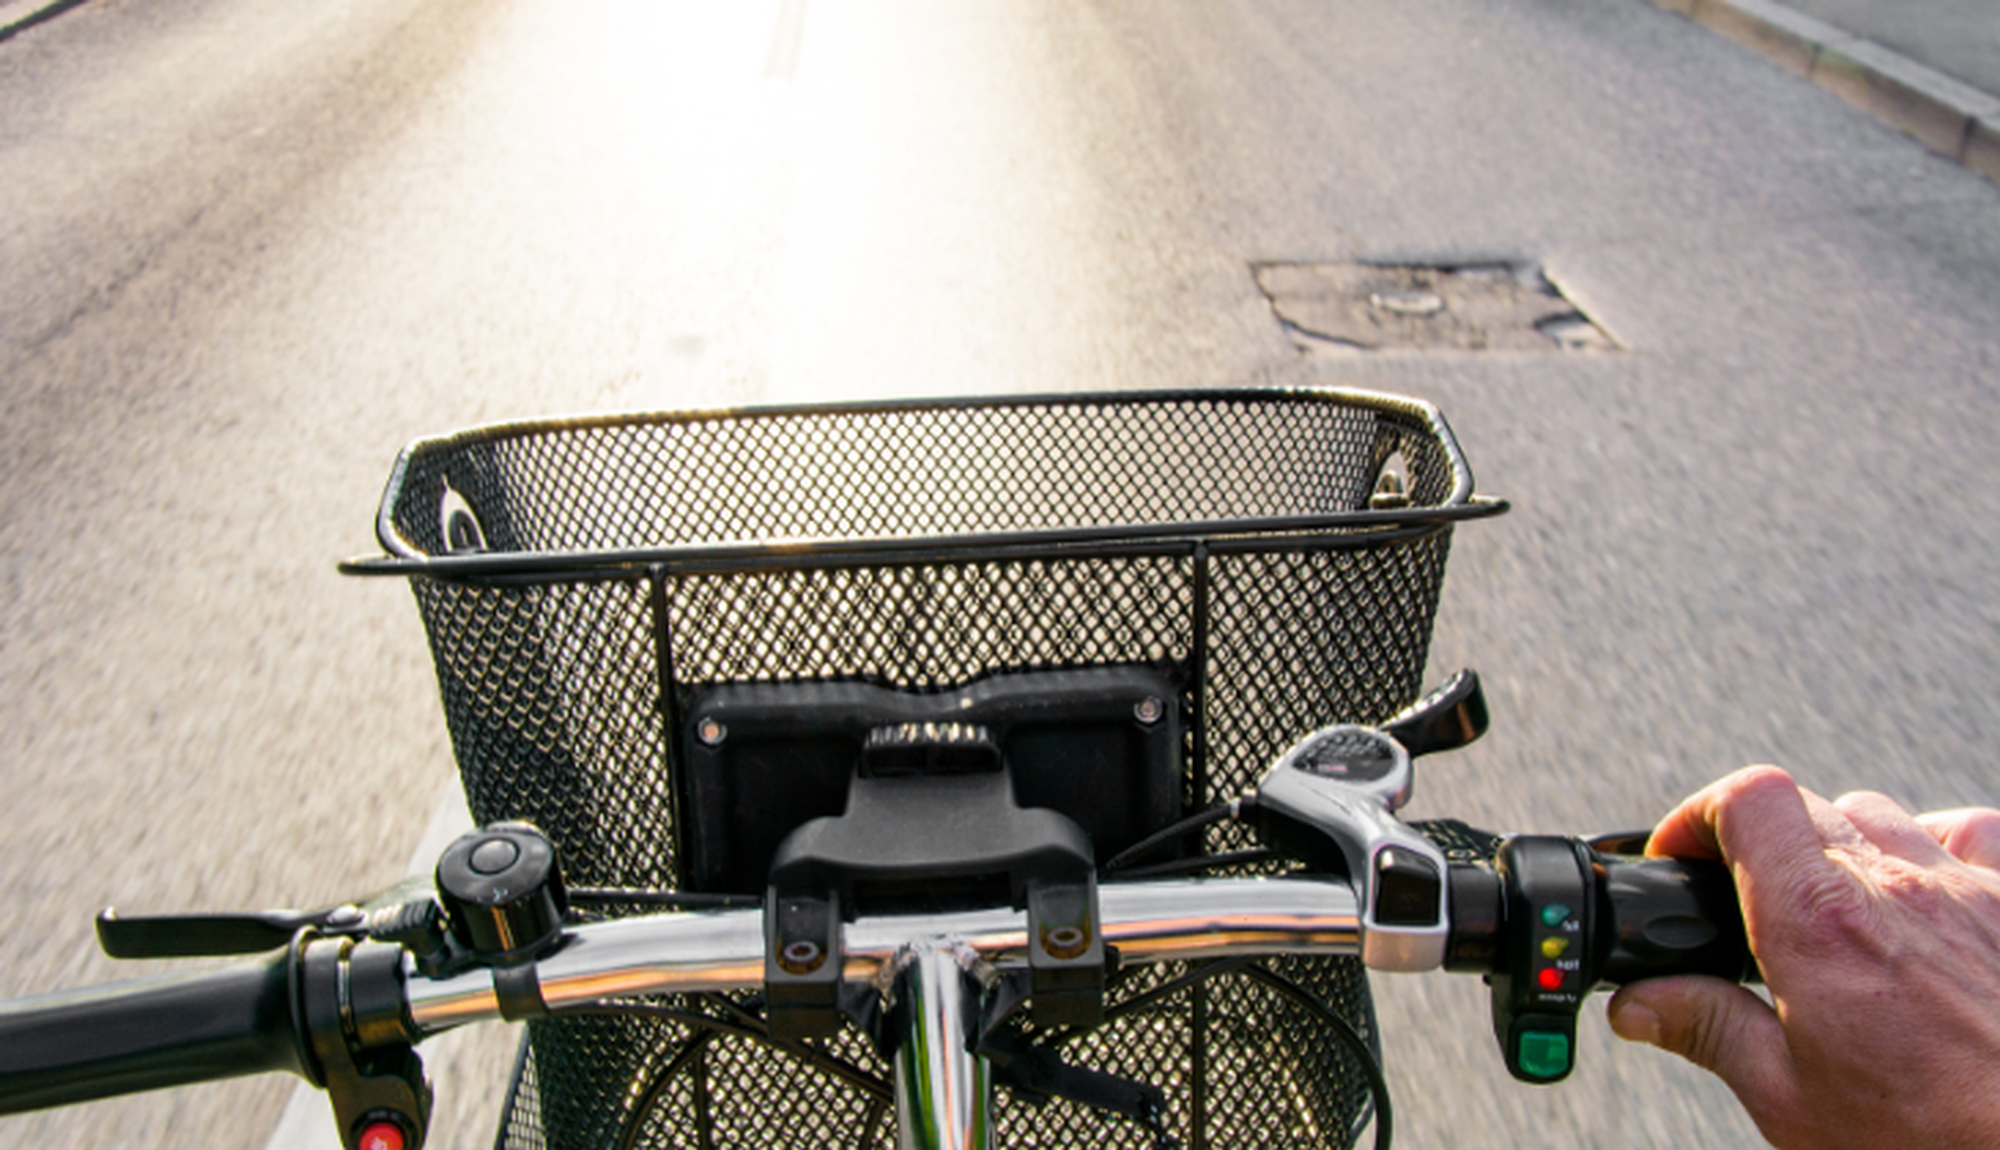 Arc Monitoring Provides an Electric Bike to Help Employee During Pandemic